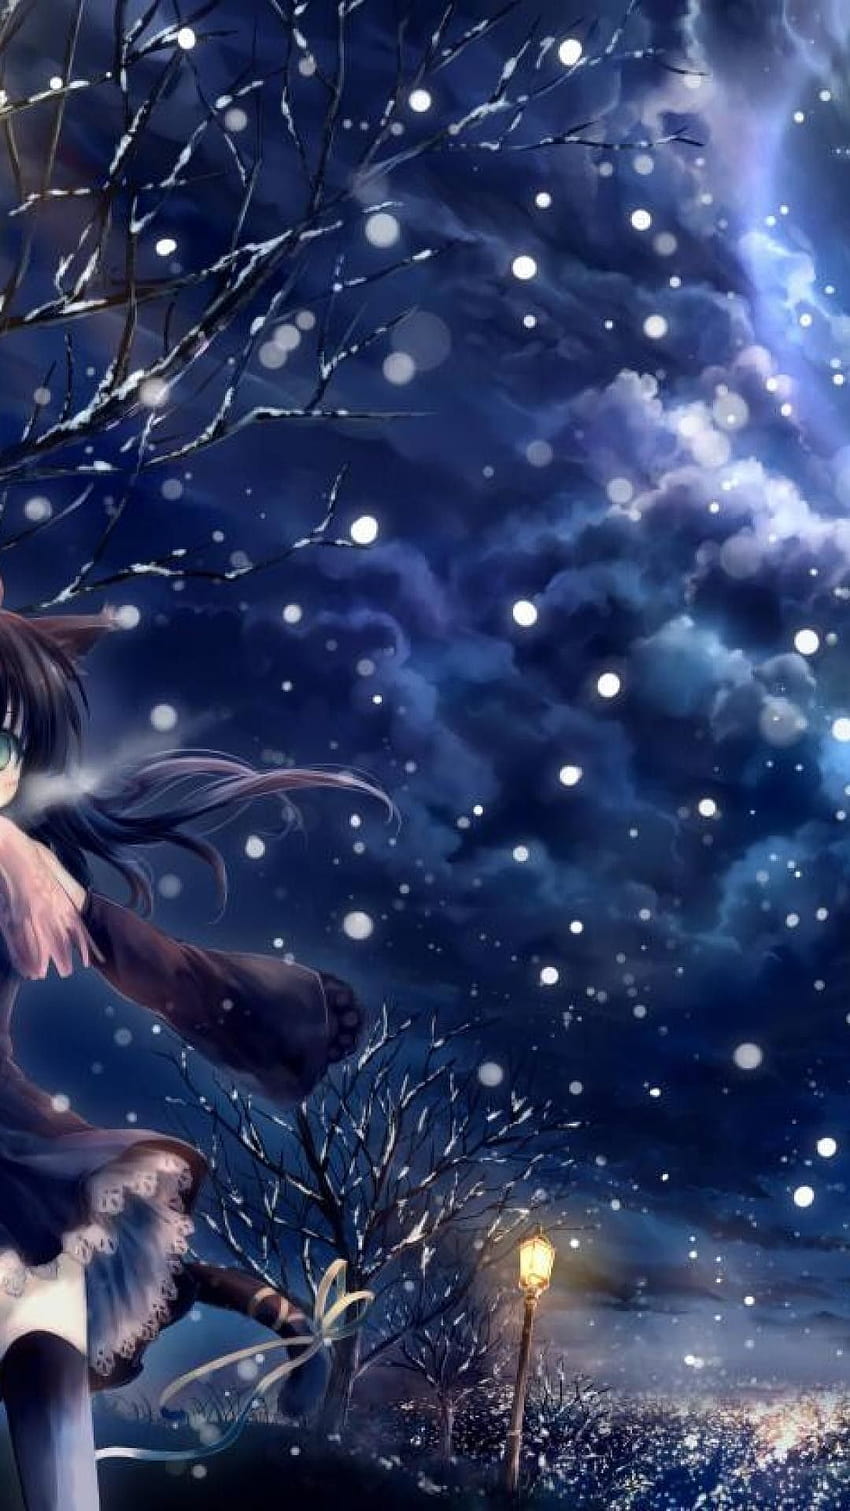 Free download Anime Girls In Winter 577x1024 Wallpaper teahubio 577x1024  for your Desktop Mobile  Tablet  Explore 28 Cute Anime Girl Winter  Wallpapers  Winter Anime Wallpaper Anime Girl Wallpaper Anime